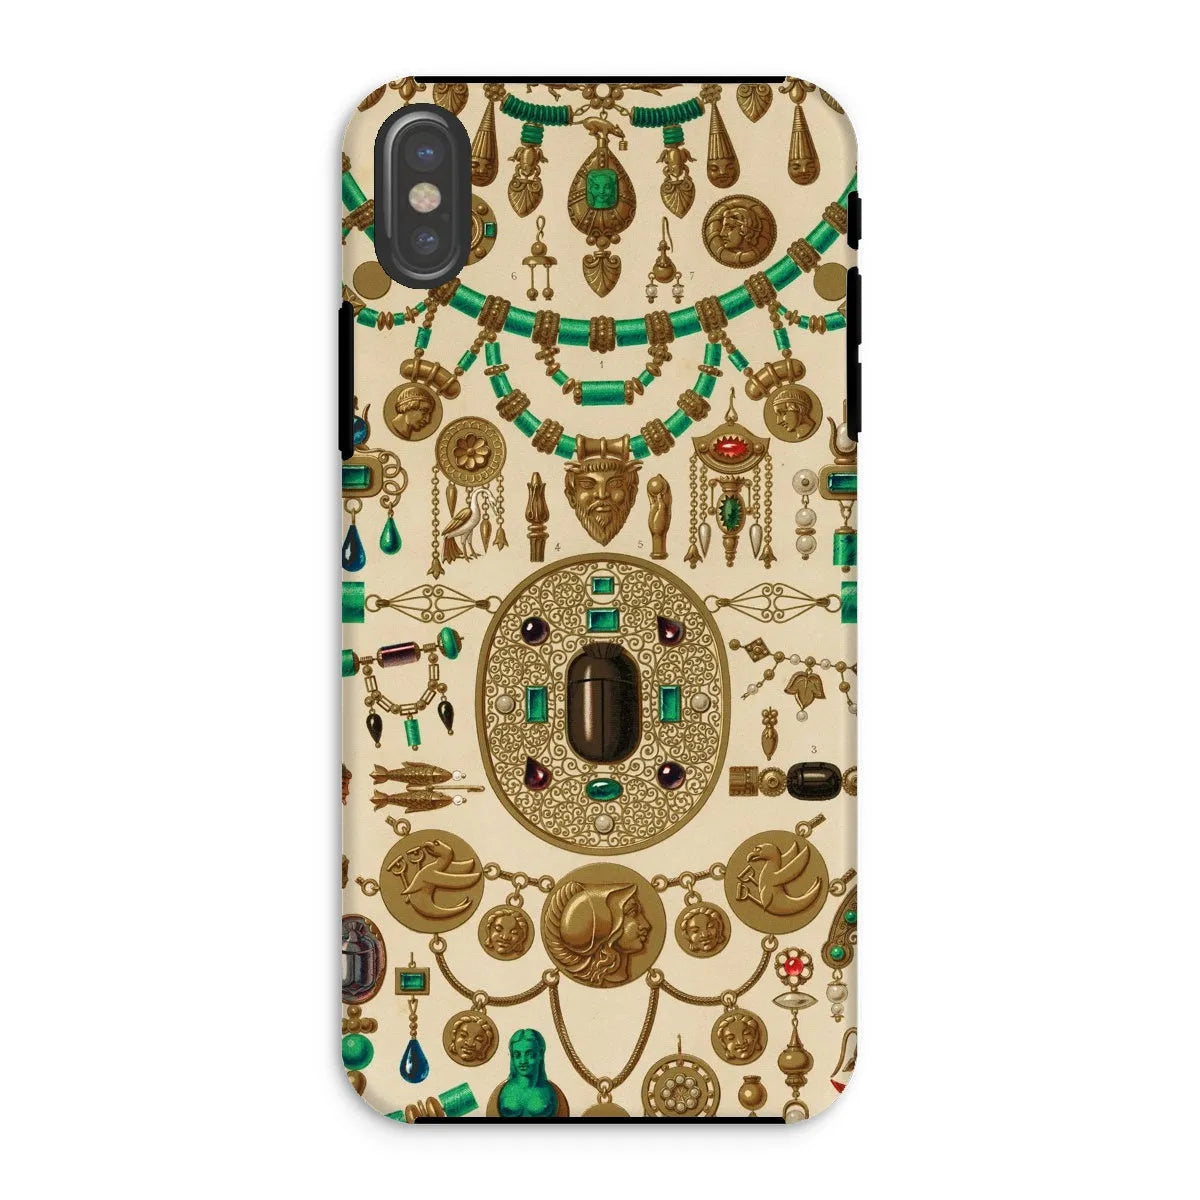 Etruscan Patterns From L’ornement Polychrome By Auguste Racinet Tough Phone Case - Iphone Xs / Matte - Mobile Phone